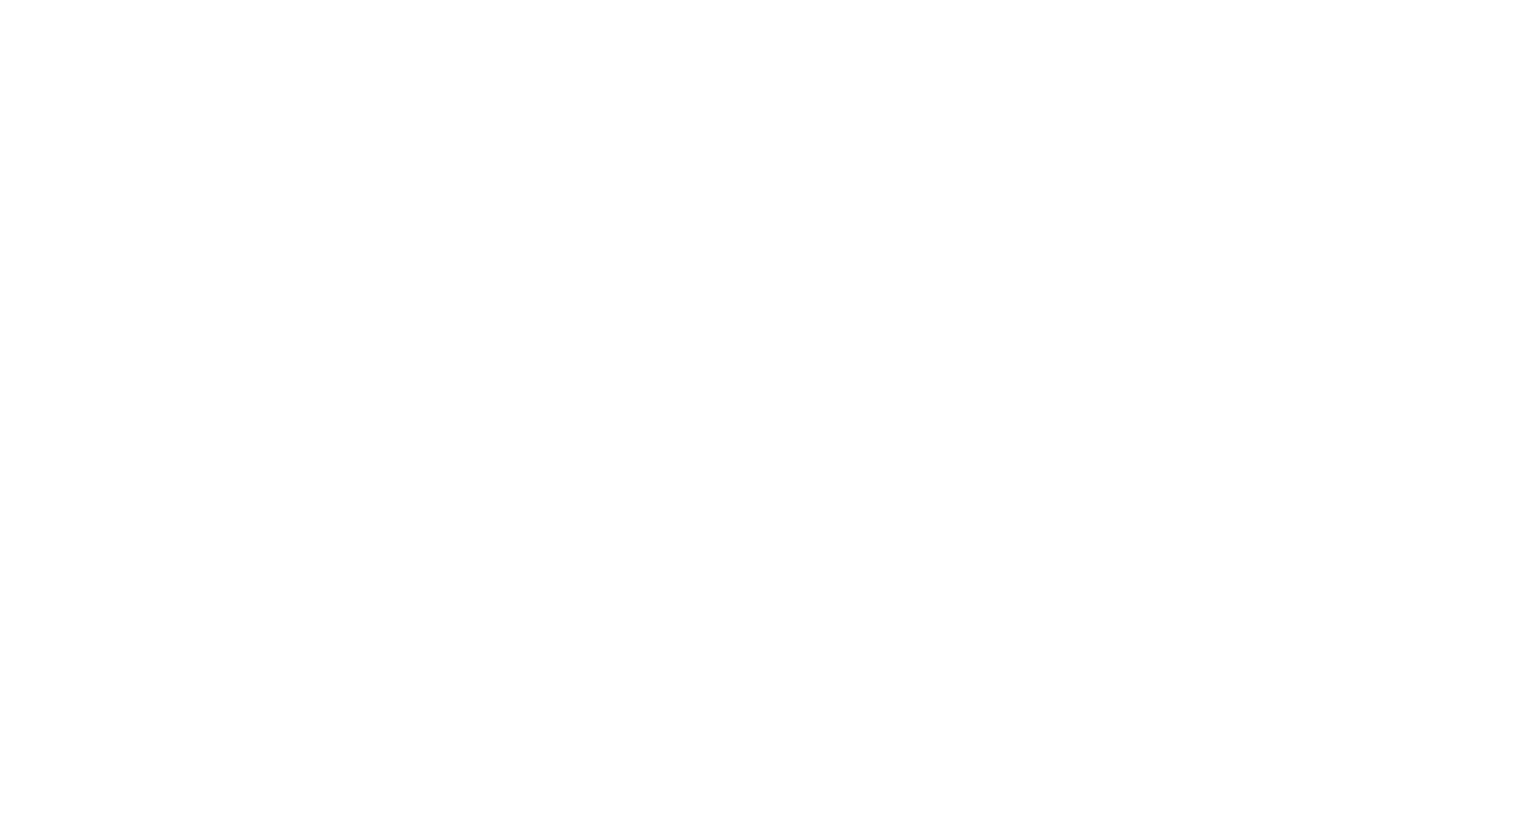 Lexcel Practice Management Standard Law Society Accredited